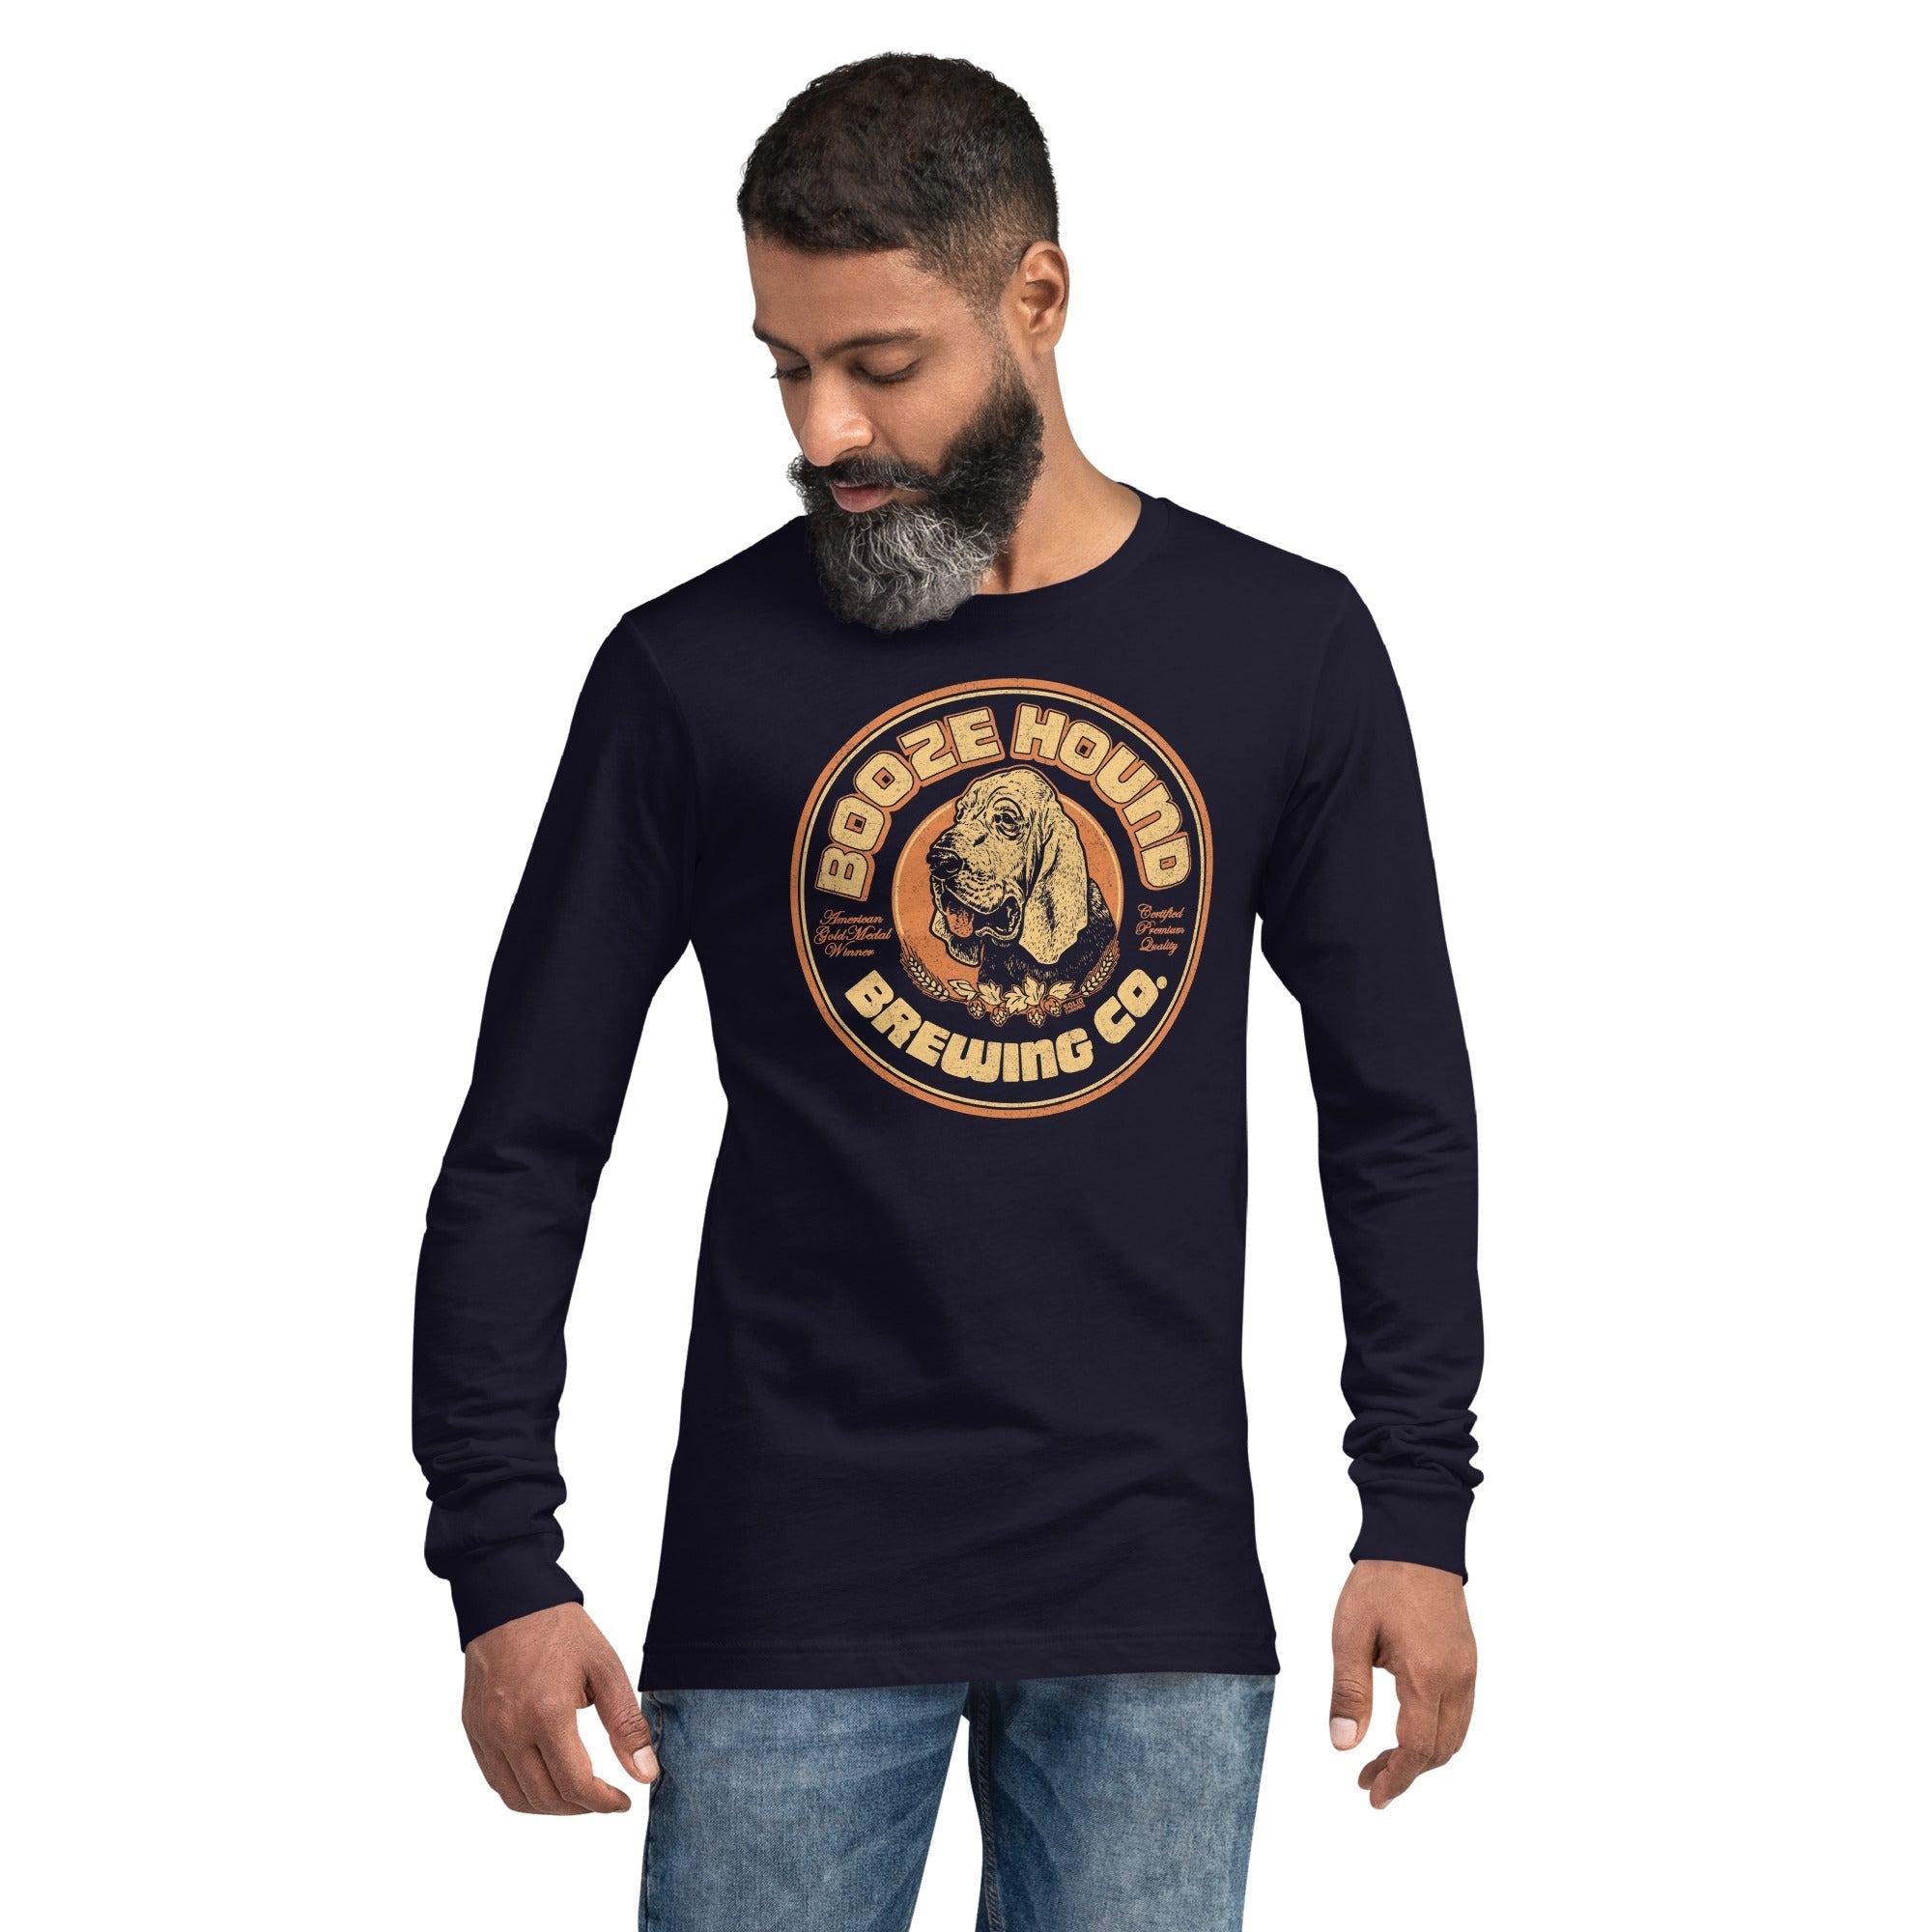 Unisex Boozehound Brewing Co. Vintage Graphic Long Sleeve Tee | Retro Drinking T-Shirt On Model - Solid Threads